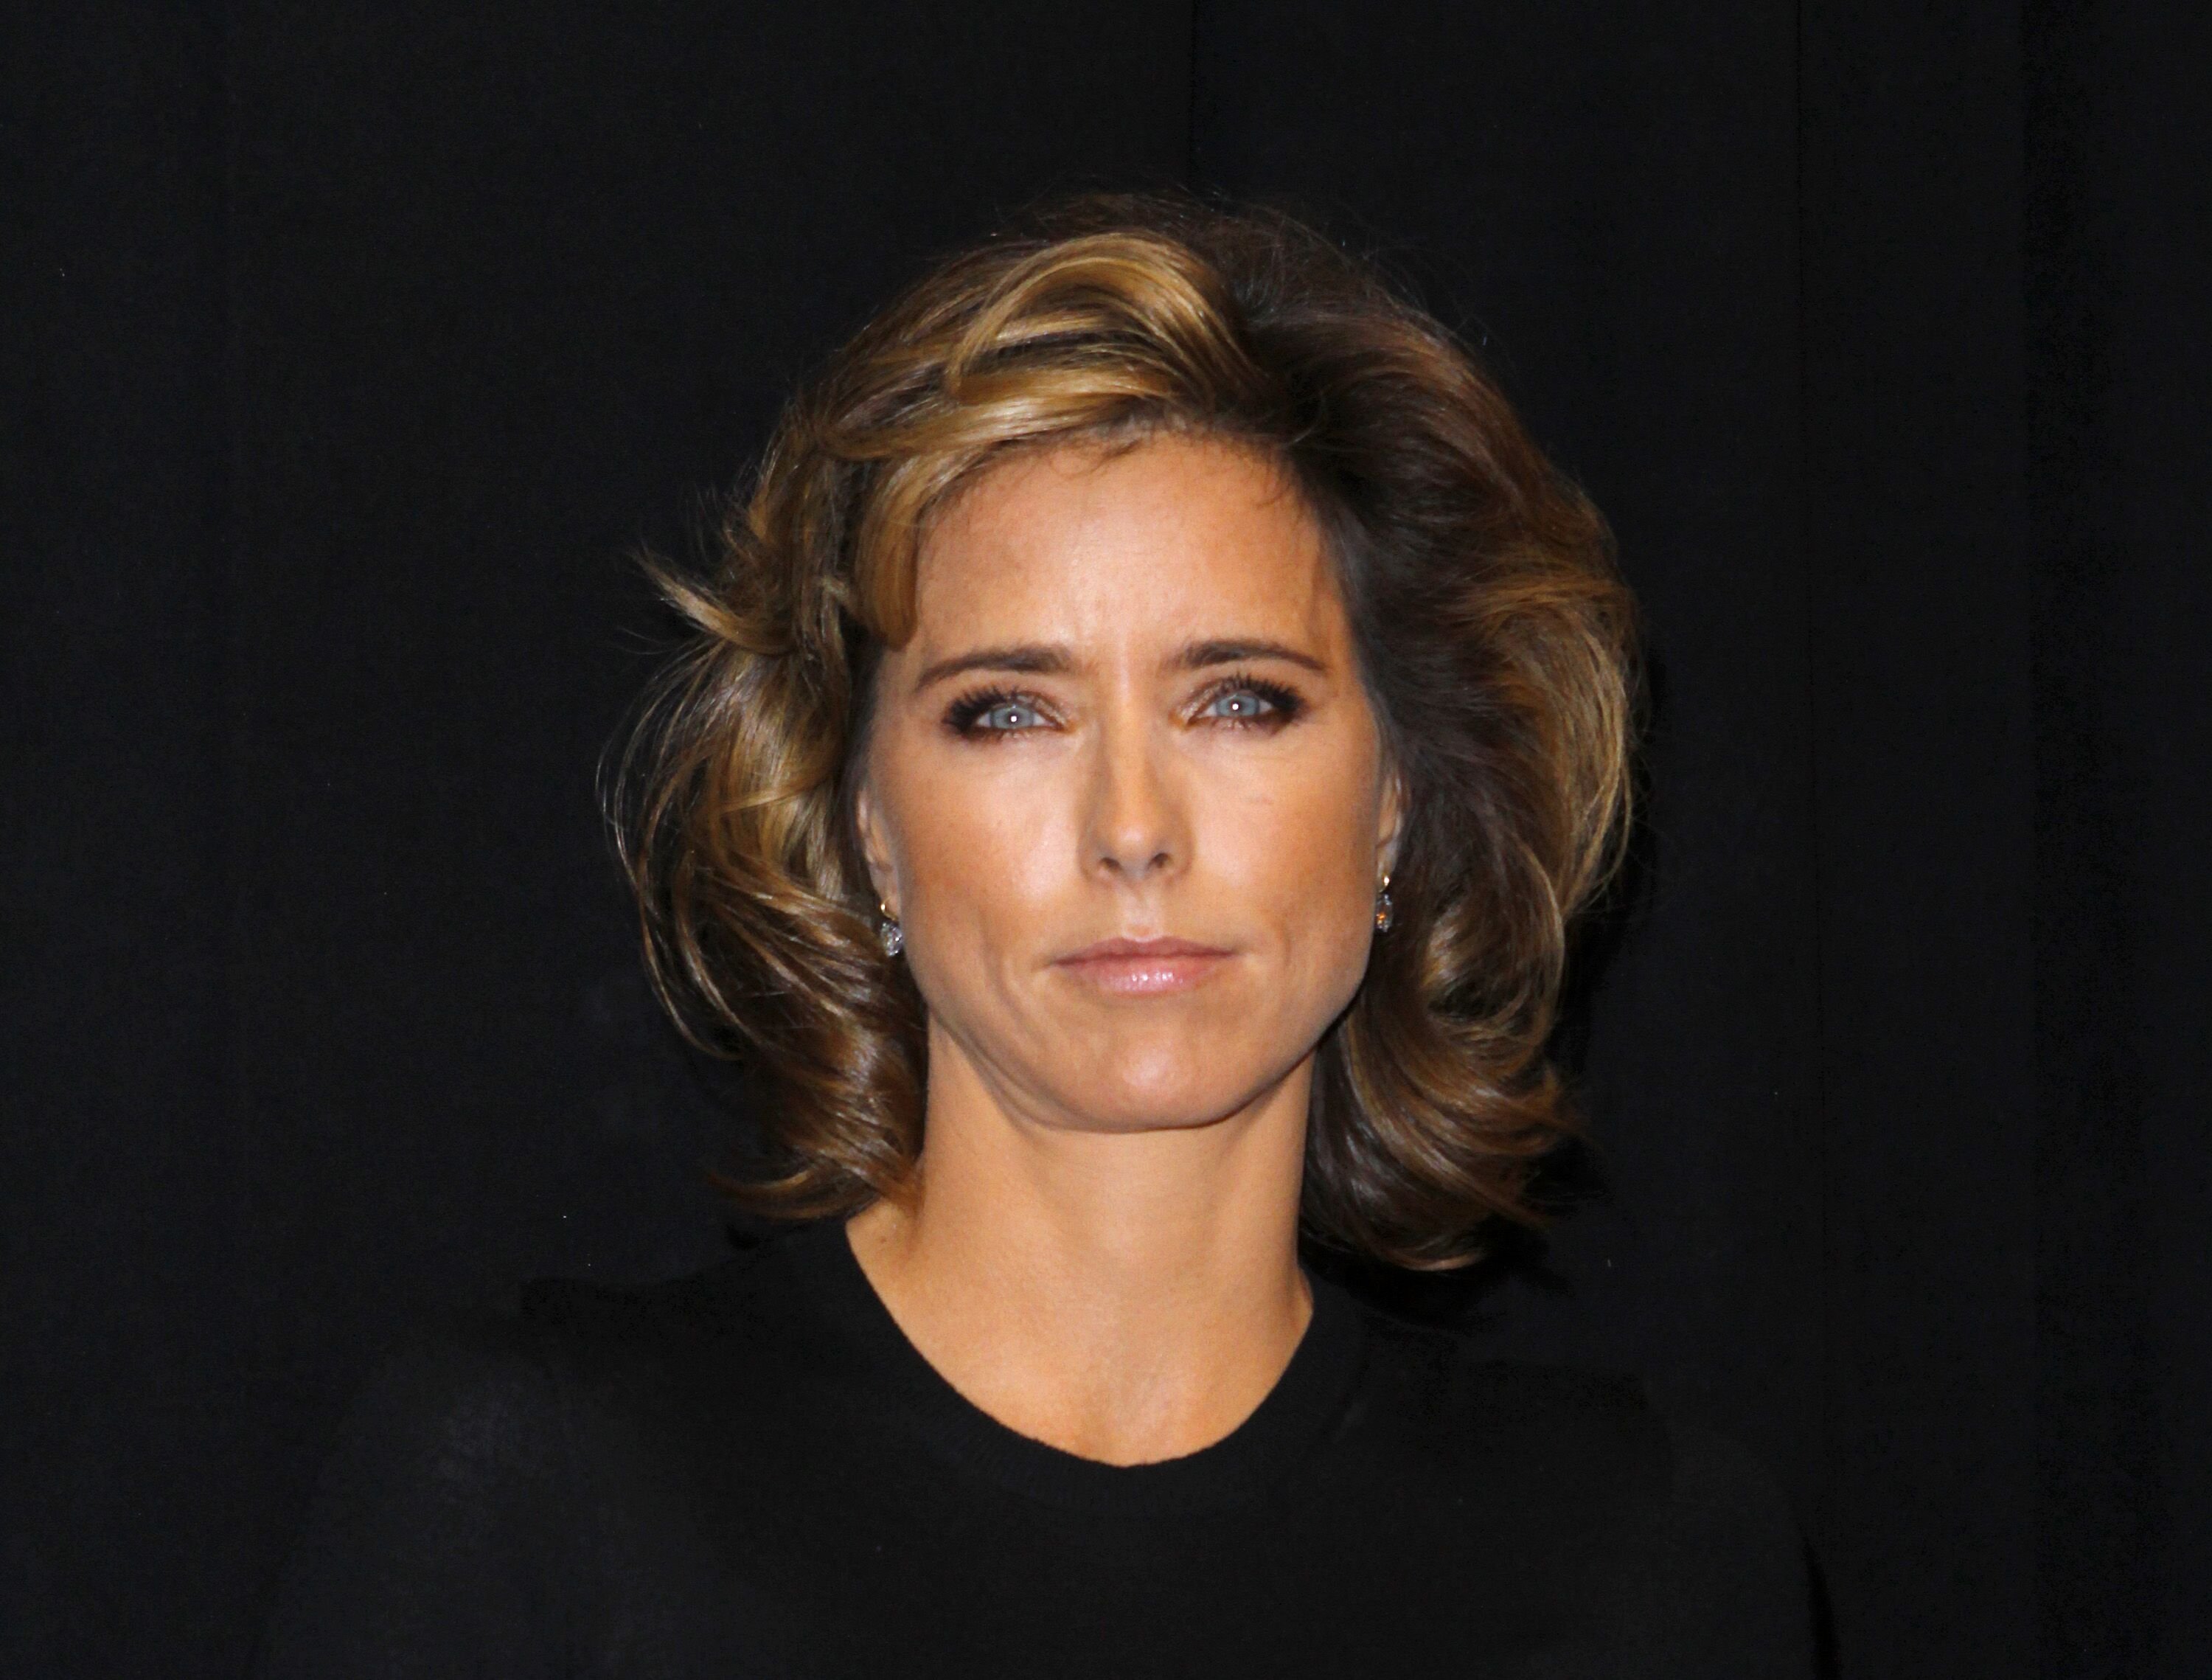 Tea Leoni attends the world premiere of "Tower Heist" at the Ziegfeld Theatre on October 24, 2011 in New York City. | Source: Getty Images